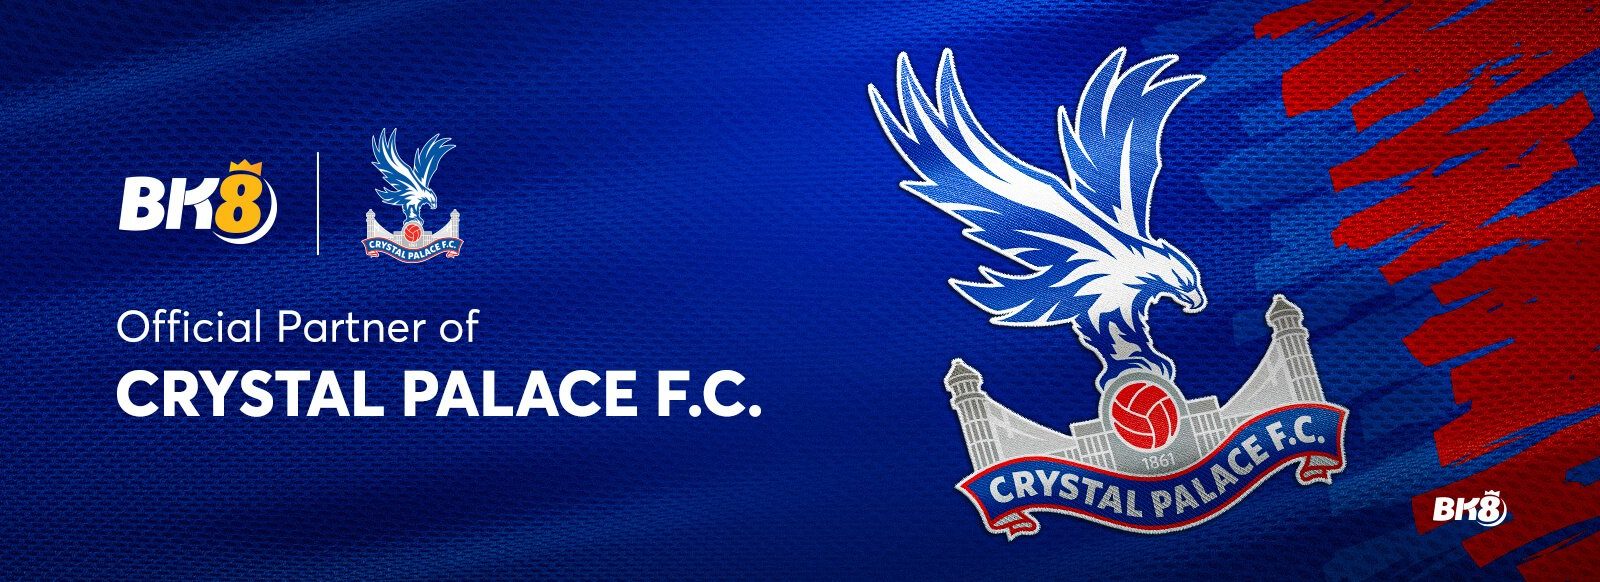 BK8-Official-Partner-of-Crystal-Palace-F.C.